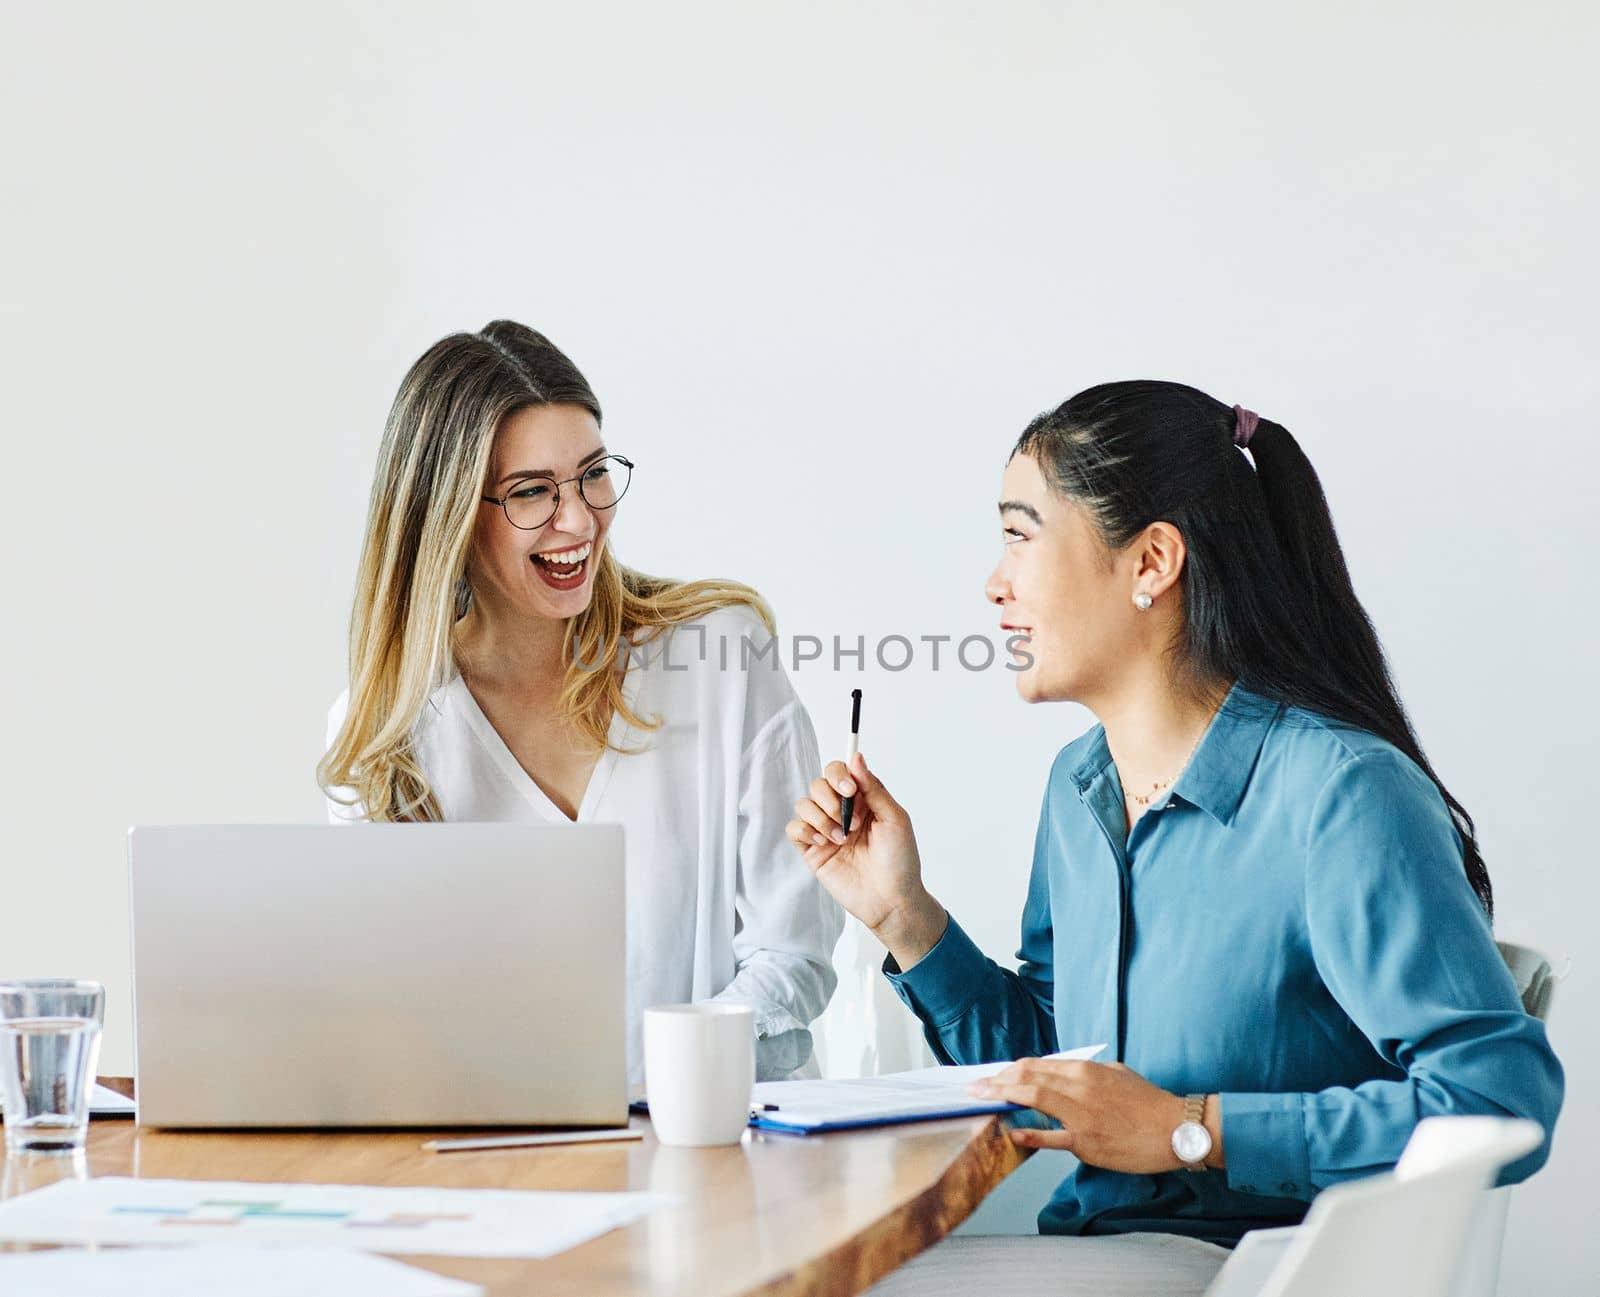 Portrait of a group of young businesswomen multiethnic working with laptop on desk and talking in a start up office